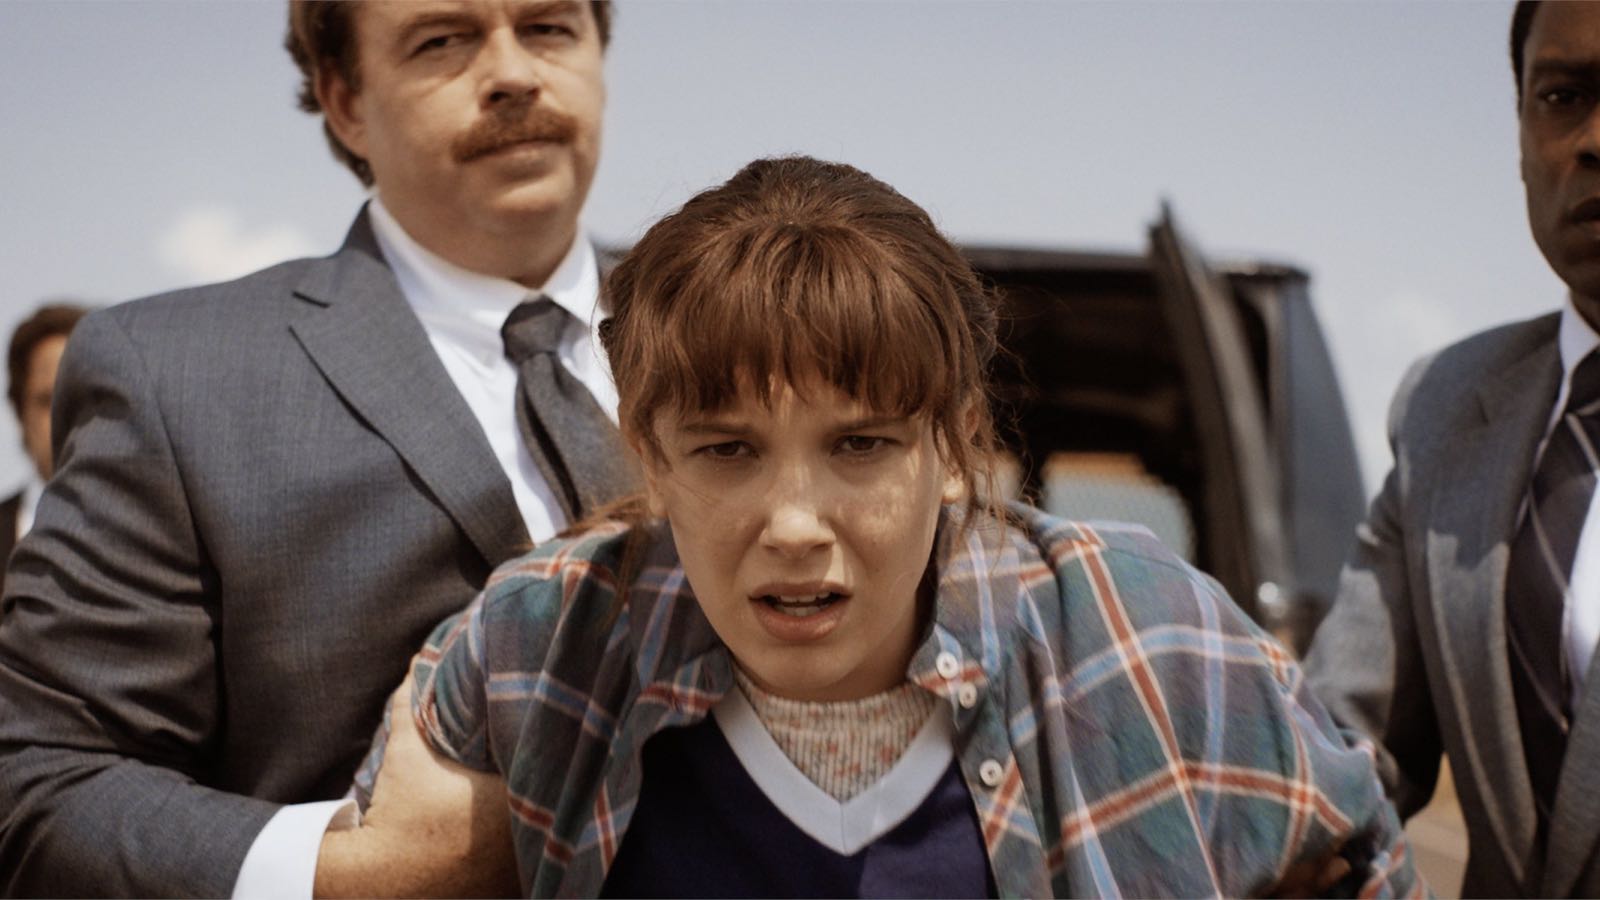 Video Stranger Things First Look At Season 4 In New Teaser Photos With Series Set For 4746